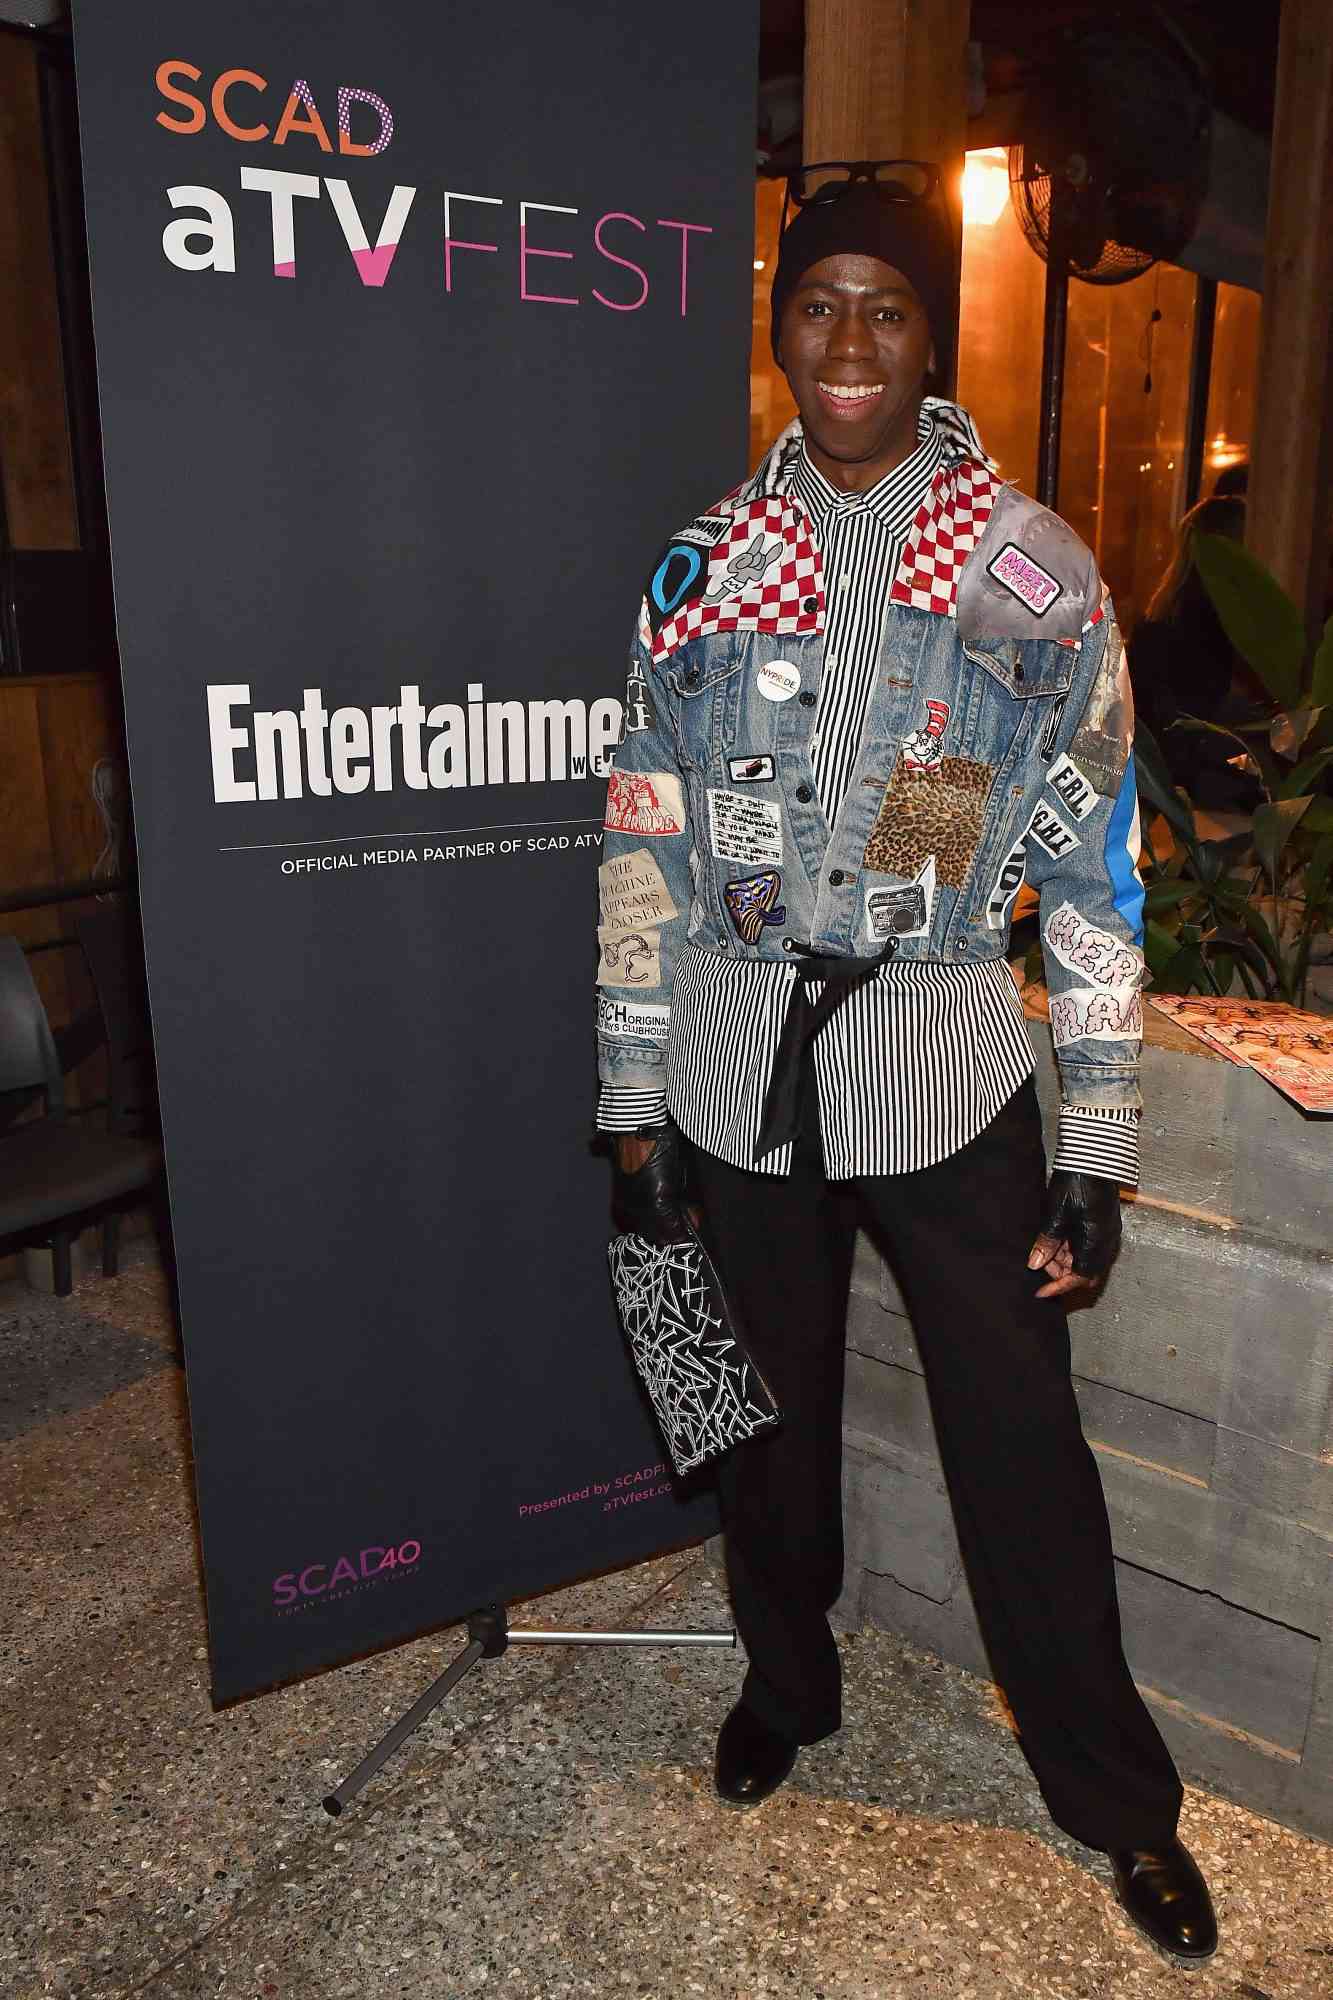 J. Alexander&nbsp;at the SCAD aTVfest and Entertainment Weekly party&nbsp;at Lure